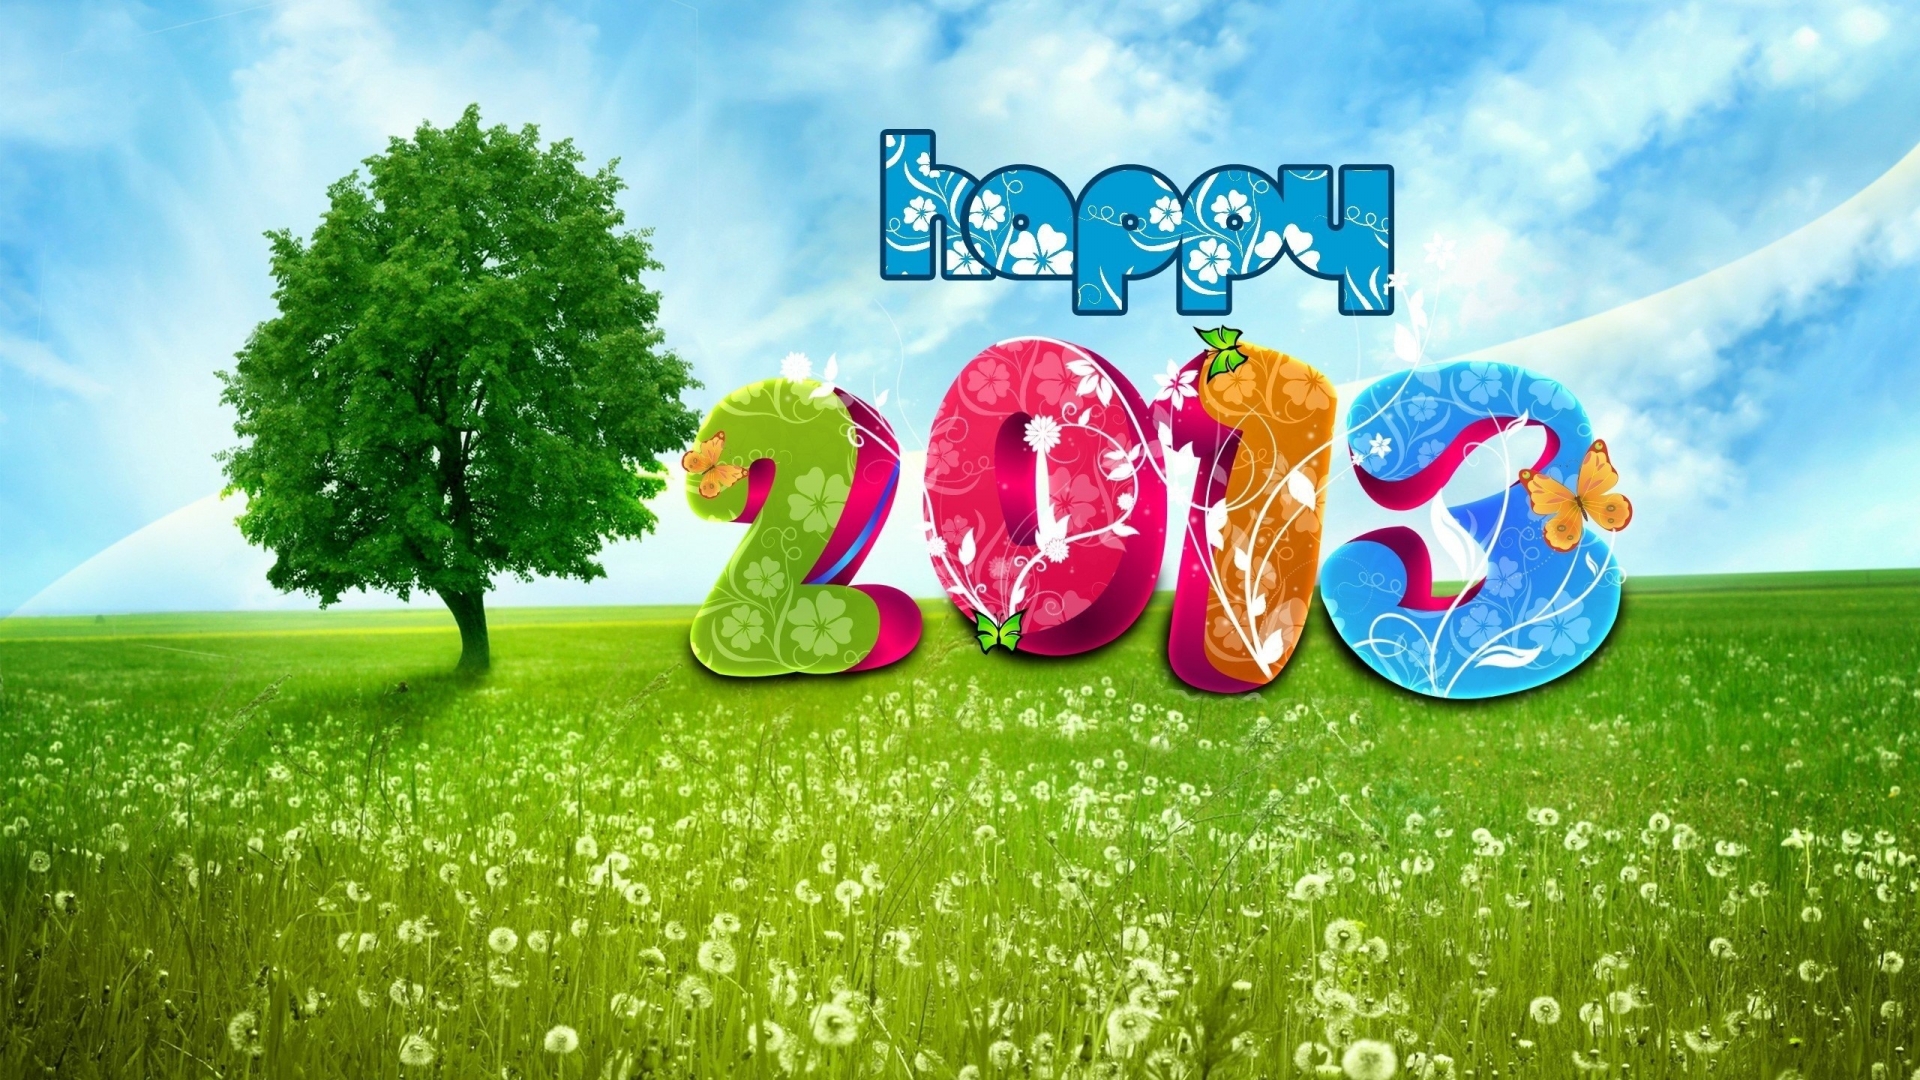 Happy 2013 Spring for 1920 x 1080 HDTV 1080p resolution